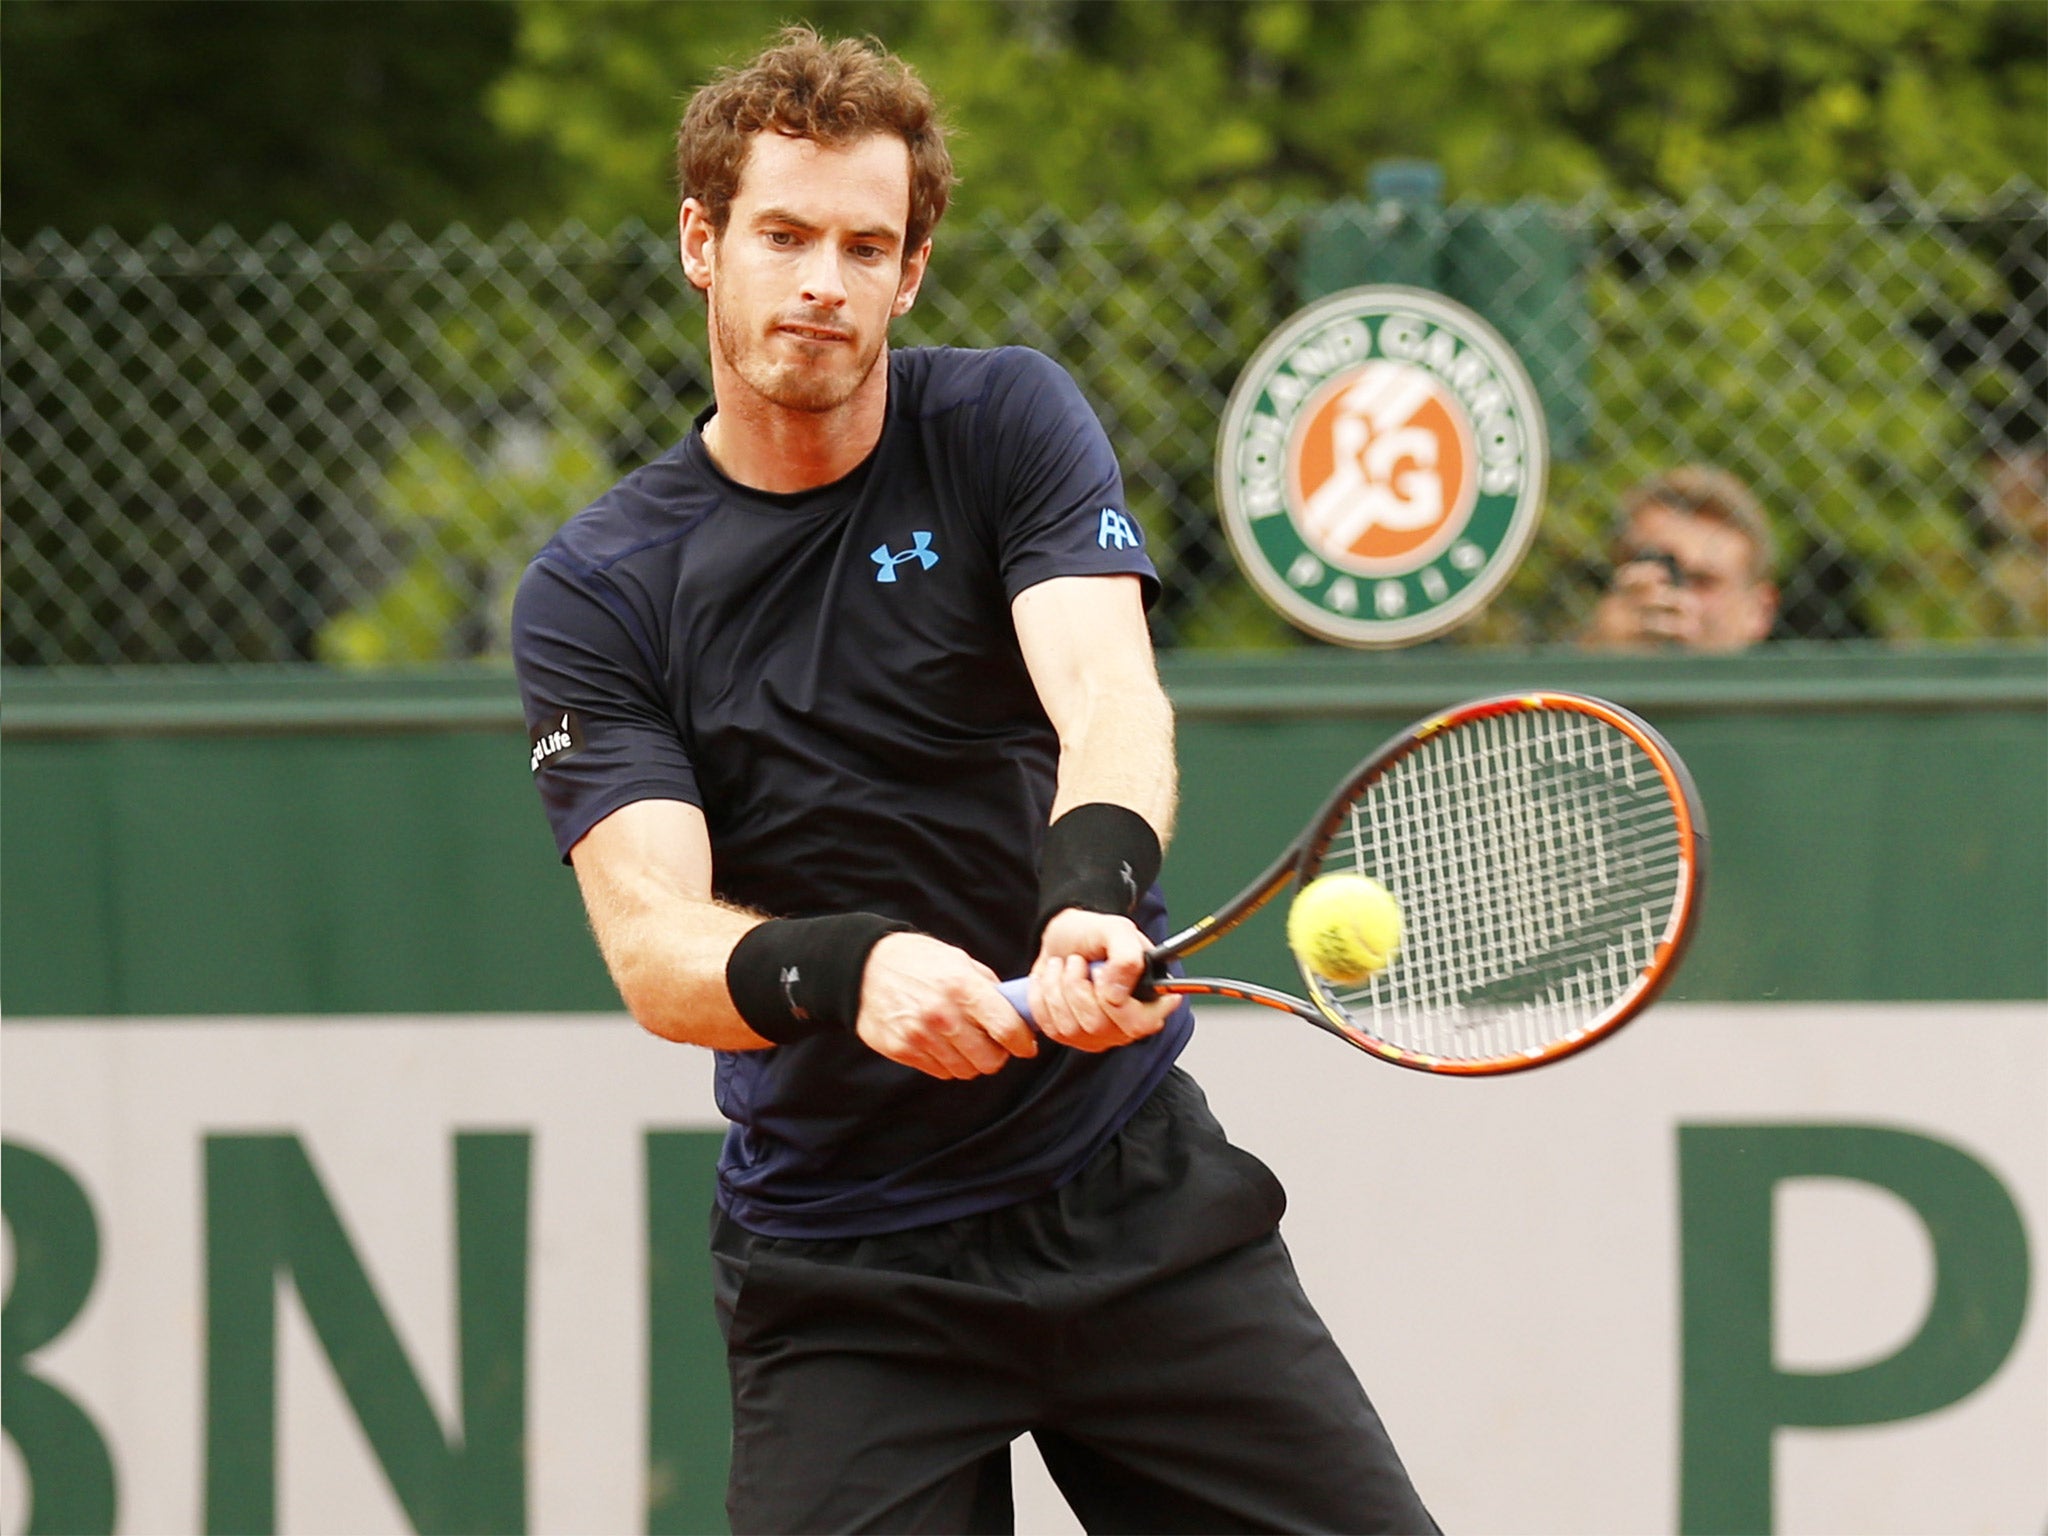 Andy Murray practising ahead of his match against Portugal’s Joao Sousa